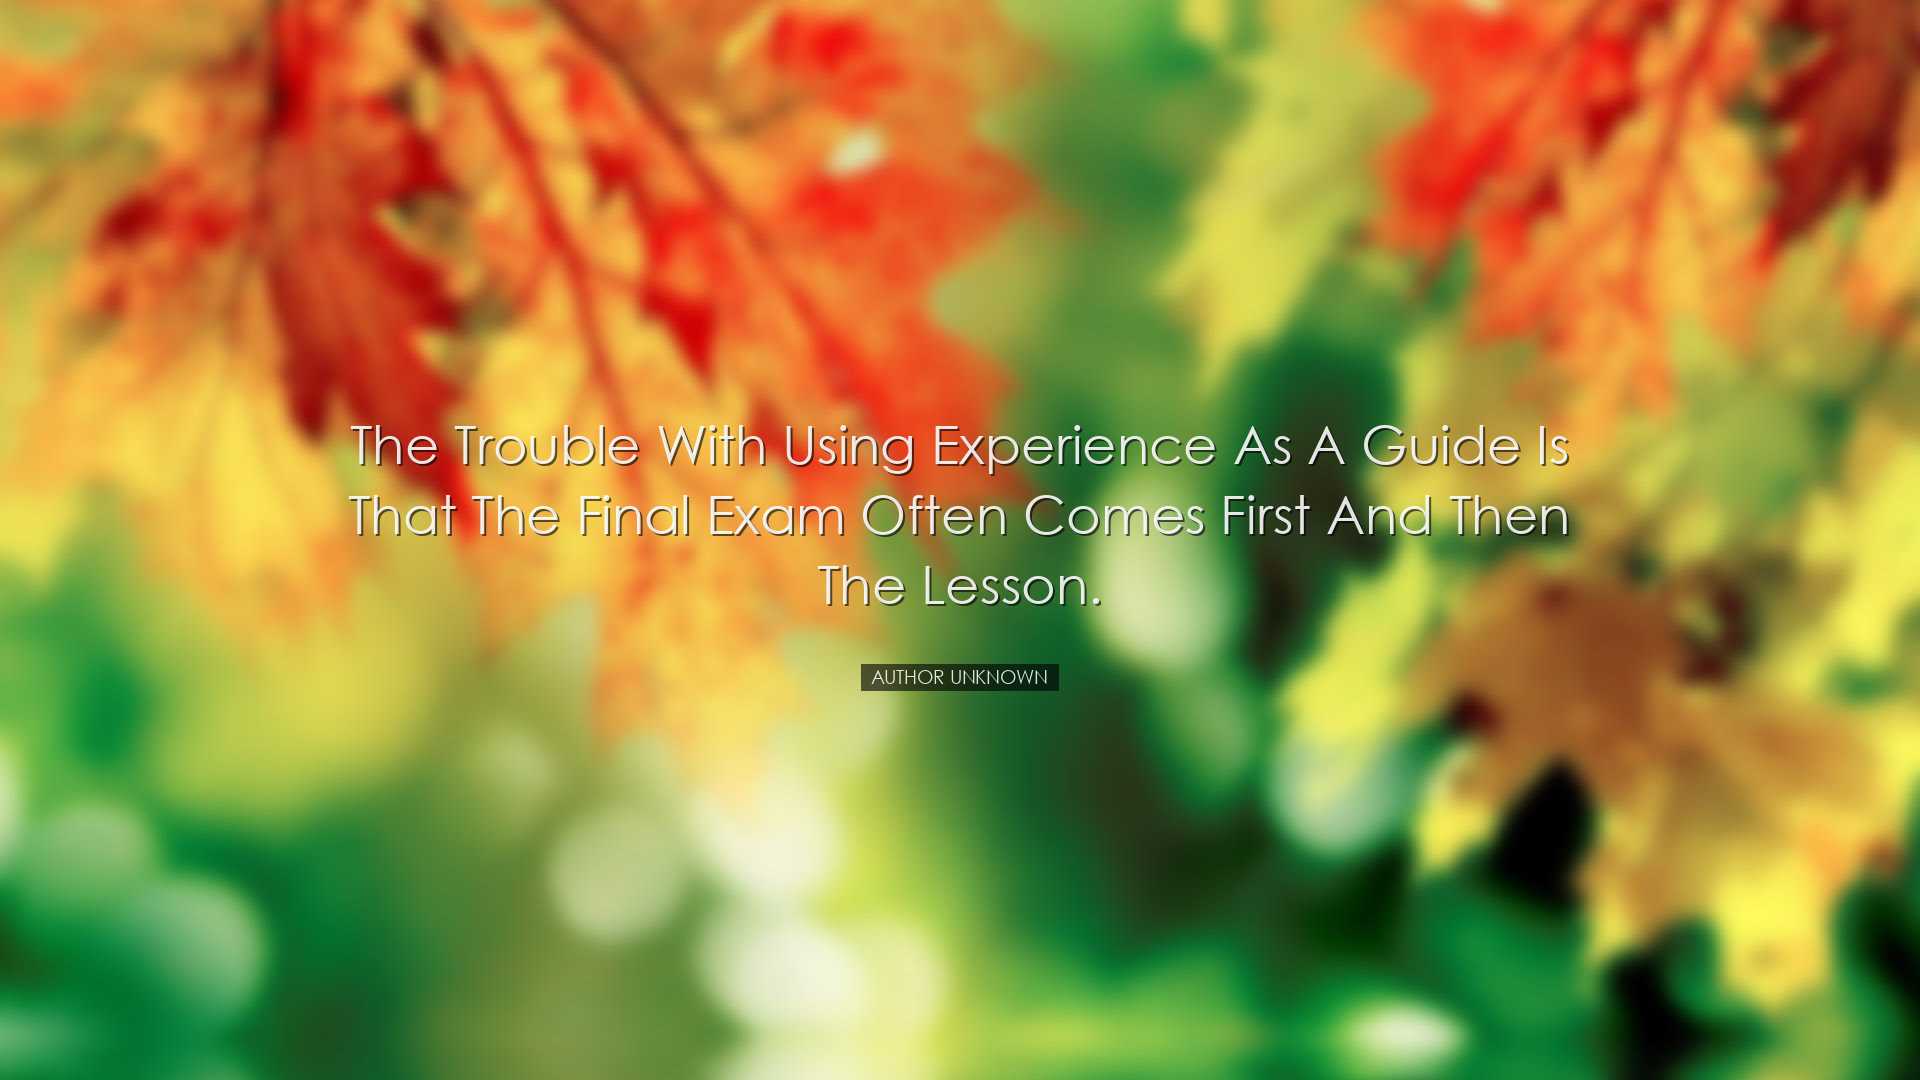 The trouble with using experience as a guide is that the final exa